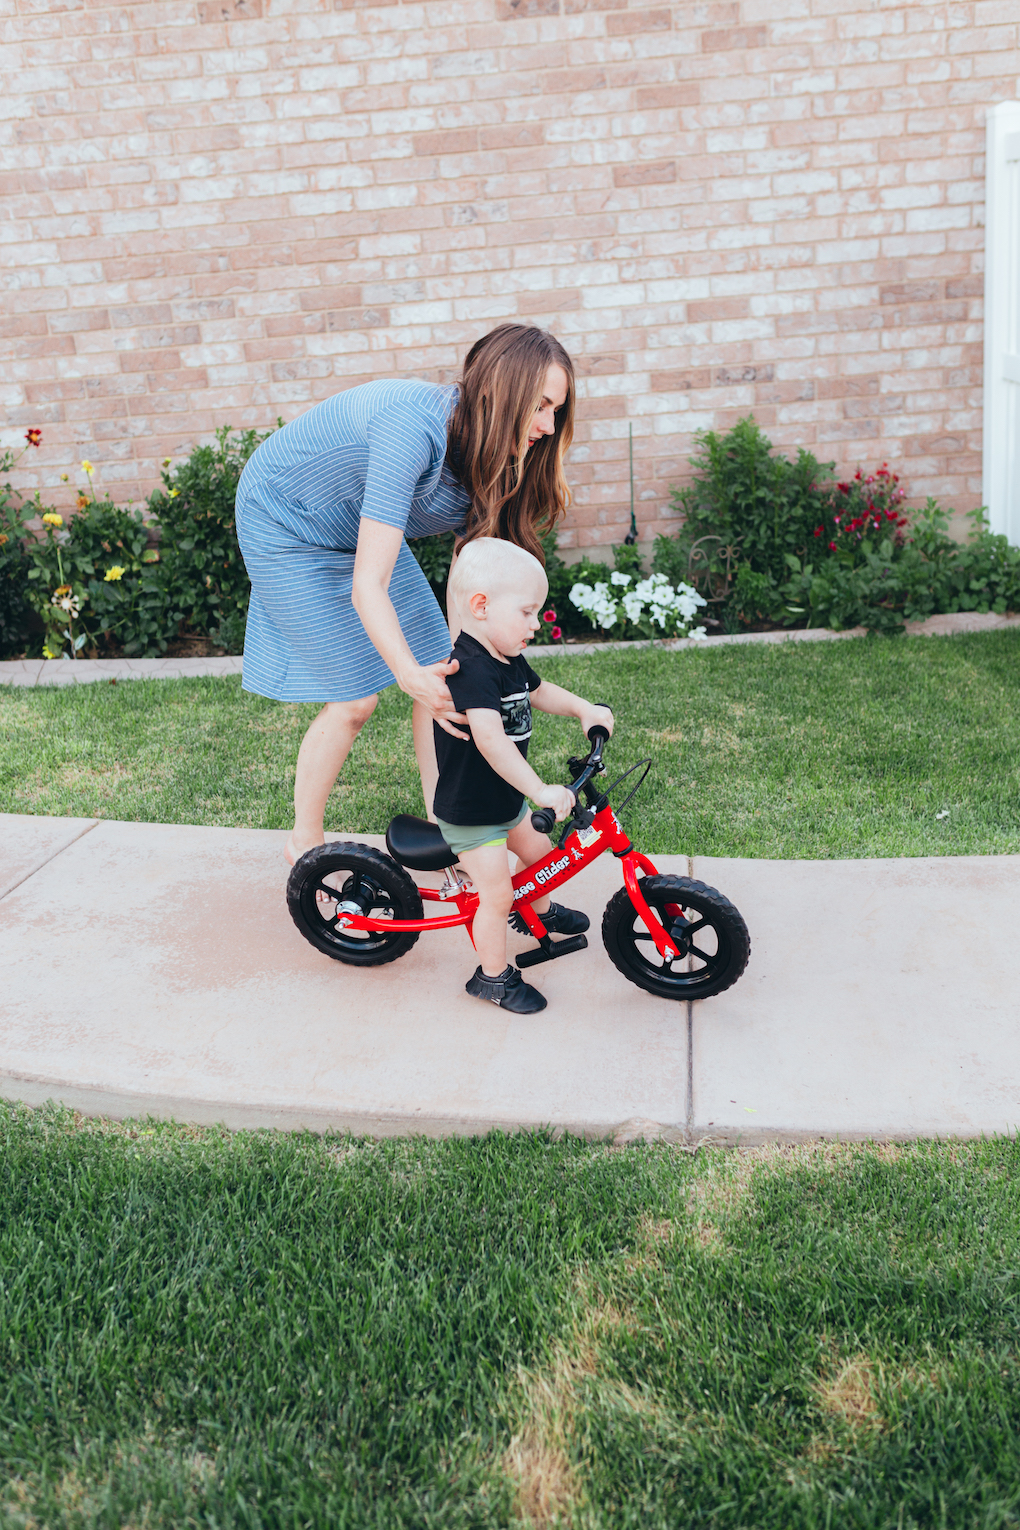 KINGS HAPPY UN-BIRTHDAY - KIDS BALL PARTY by Utah blogger Dani Marie - Mom helping toddler to ride red balance bike 